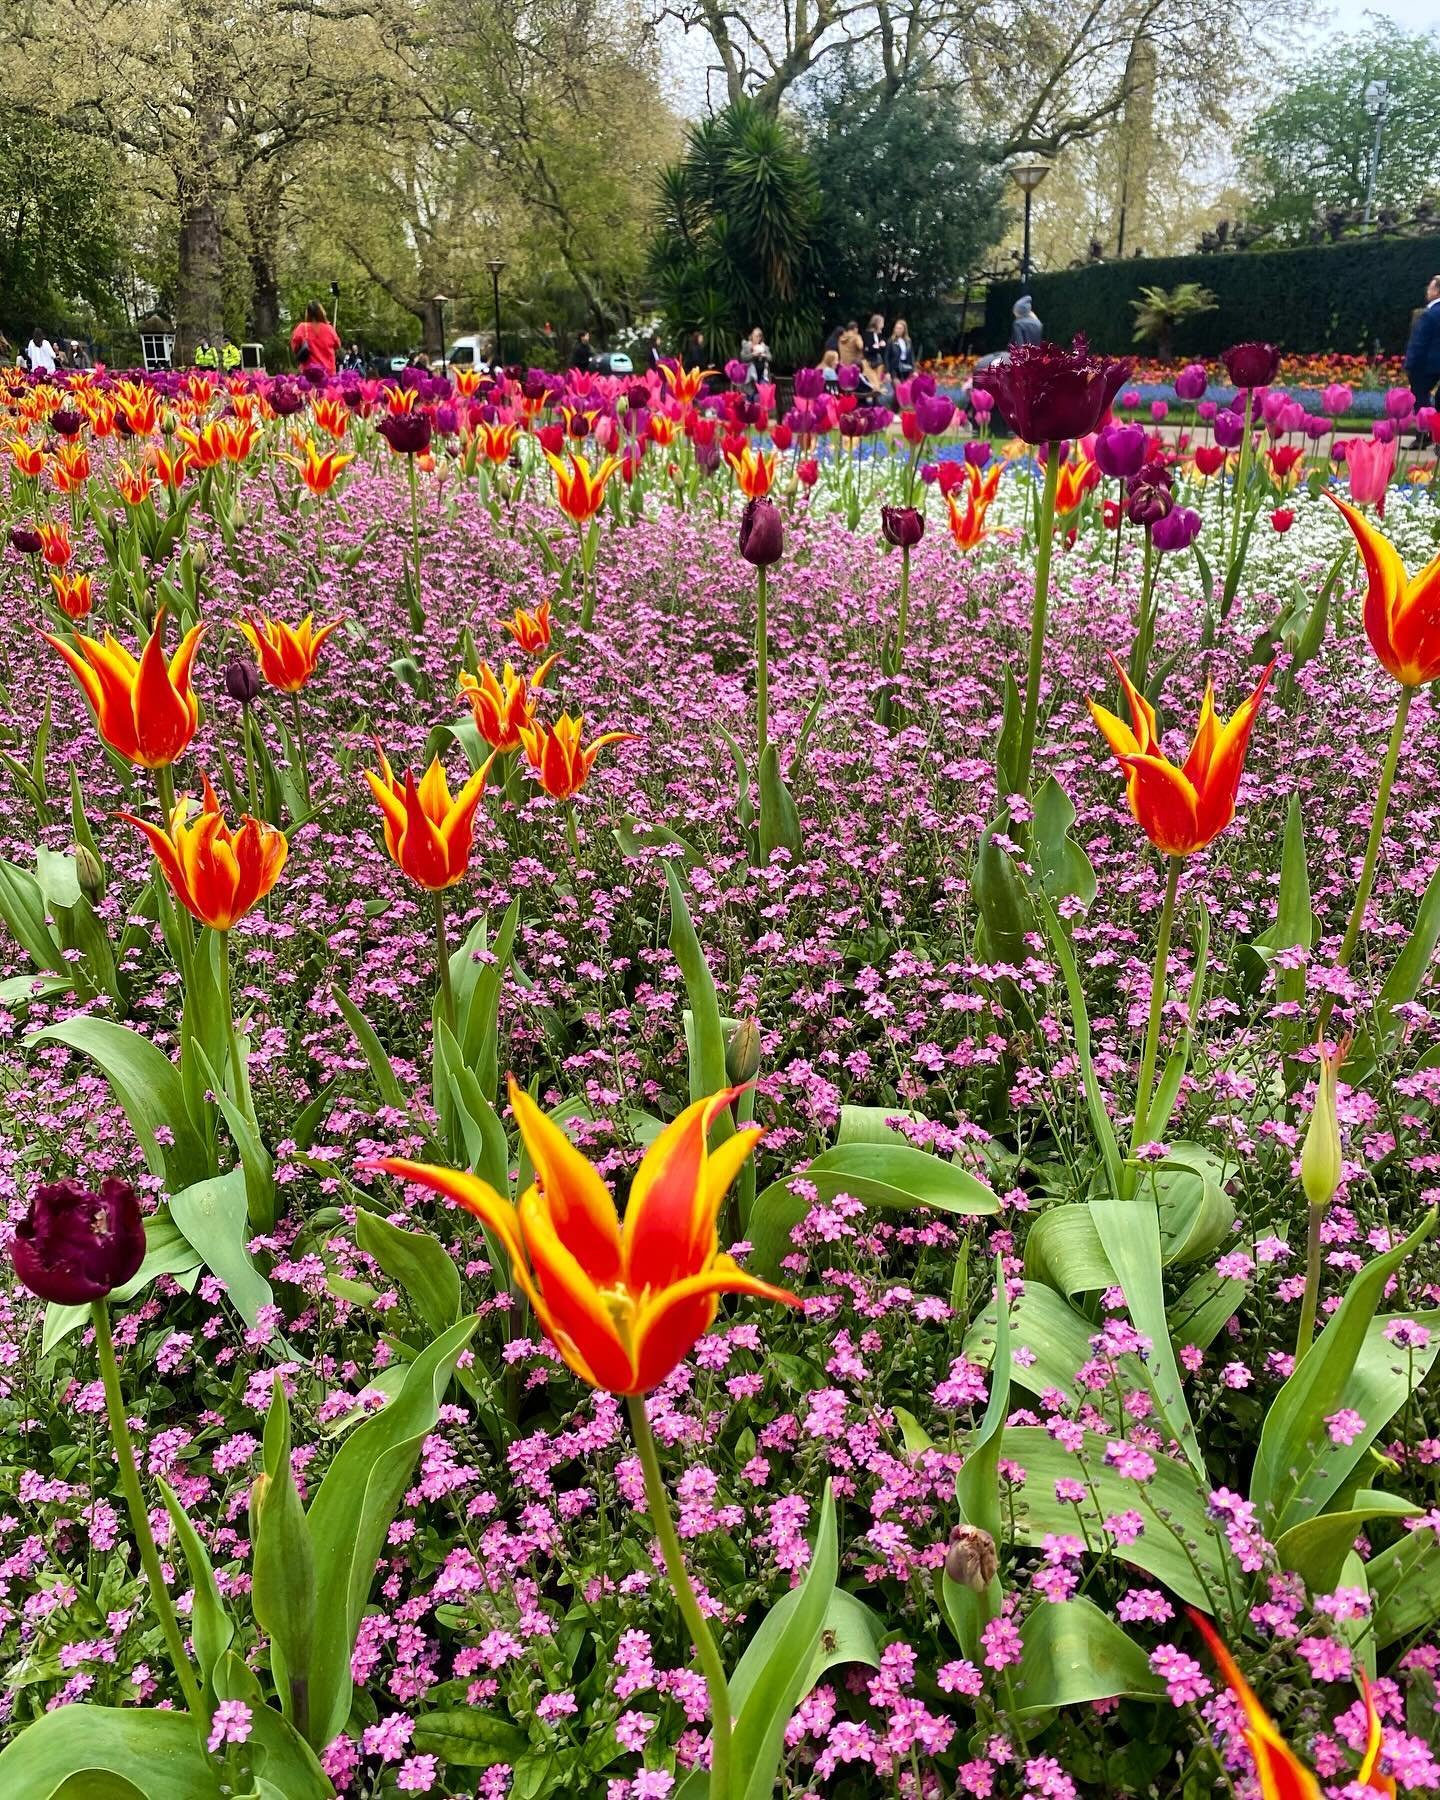 Every year I wait for this reunion in the park. 
Sometimes I arrive a little early, for fear of arriving late, it&rsquo;s only a once a year moment -
One of those washing the winter greys. 
At last, the headiness of colour, stripes and bold magentas,